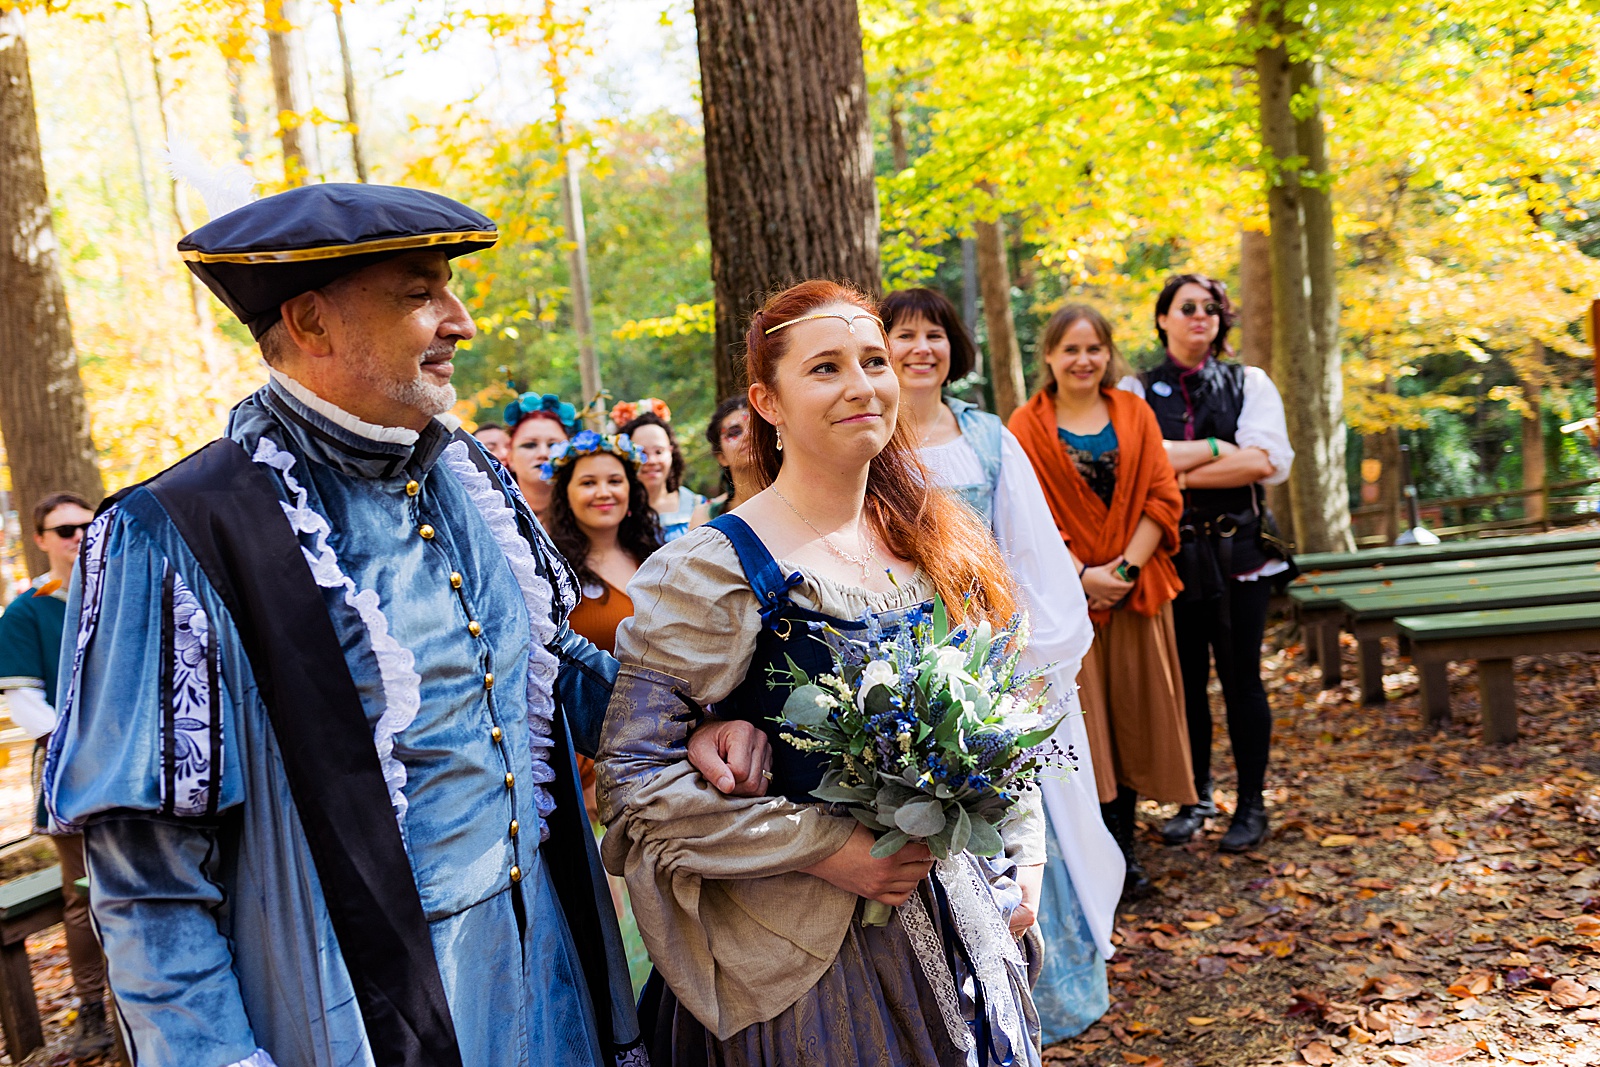 Father of the bride walks his daughter down the aisle at a renn faire wedding. 